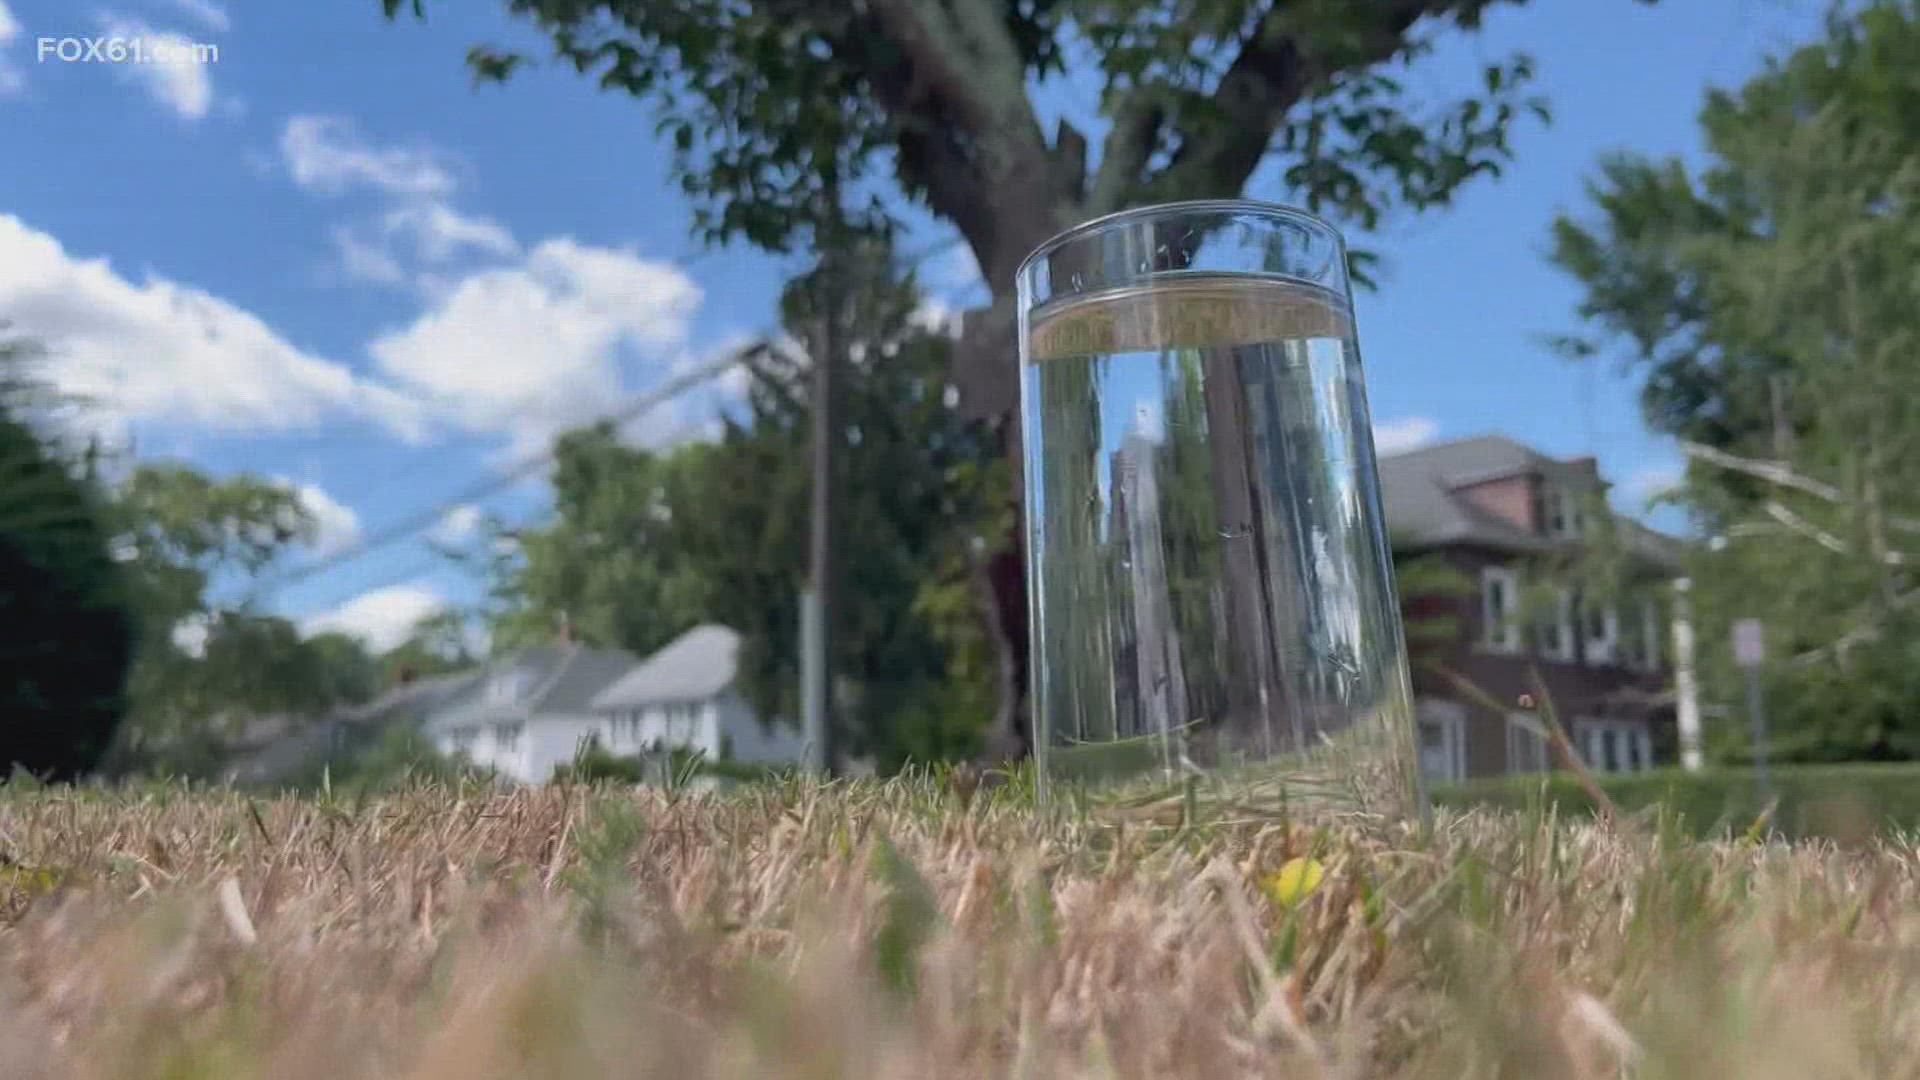 FOX61 Meteorologist Ryan Breton tested how fast dried-out grass and soil can absorb a glass of water after weeks of very little rain in Connecticut.